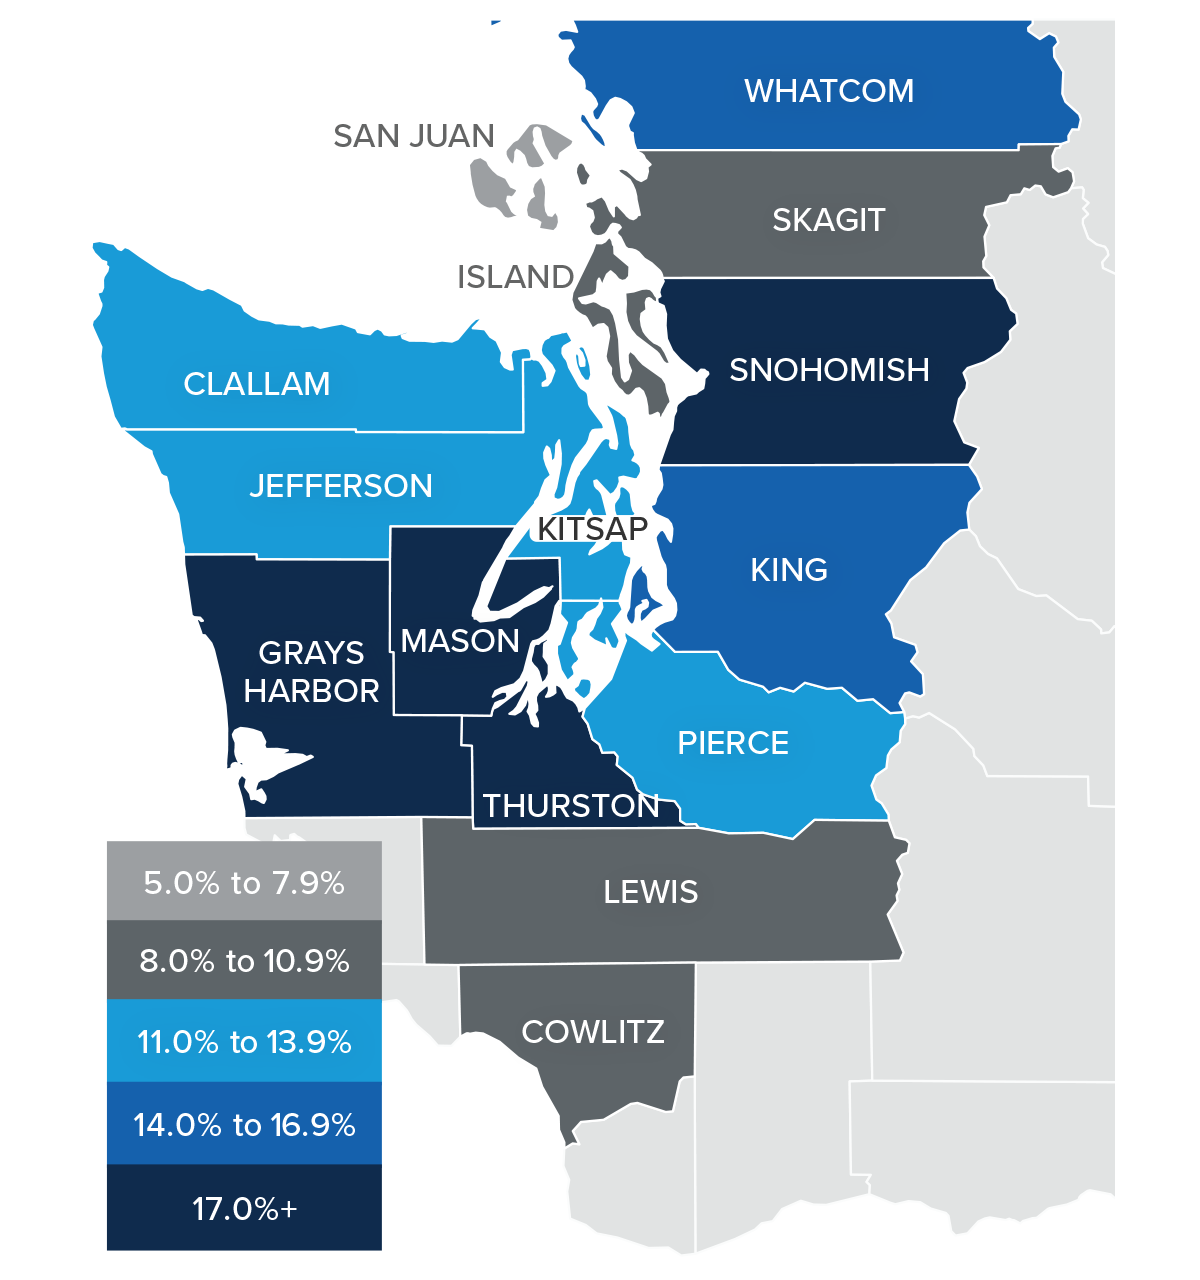 A map showing the real estate home prices percentage changes for various counties in Western Washington. Different colors correspond to different tiers of percentage change. San Juan County is the only county with a percentage change in the 5% to 7.9% range, Skagit, Lewis, and Cowlitz counties are in the 8% to 10.9% change range, Clallam, Jefferson, Kitsap, and Pierce are in the 11% to 13.9 % change range, King and Whatcom counties are in the 14% to 16.9% change range, and Grays Harbor, Mason, Thurston, and Snohomish counties are in the 17% + range.